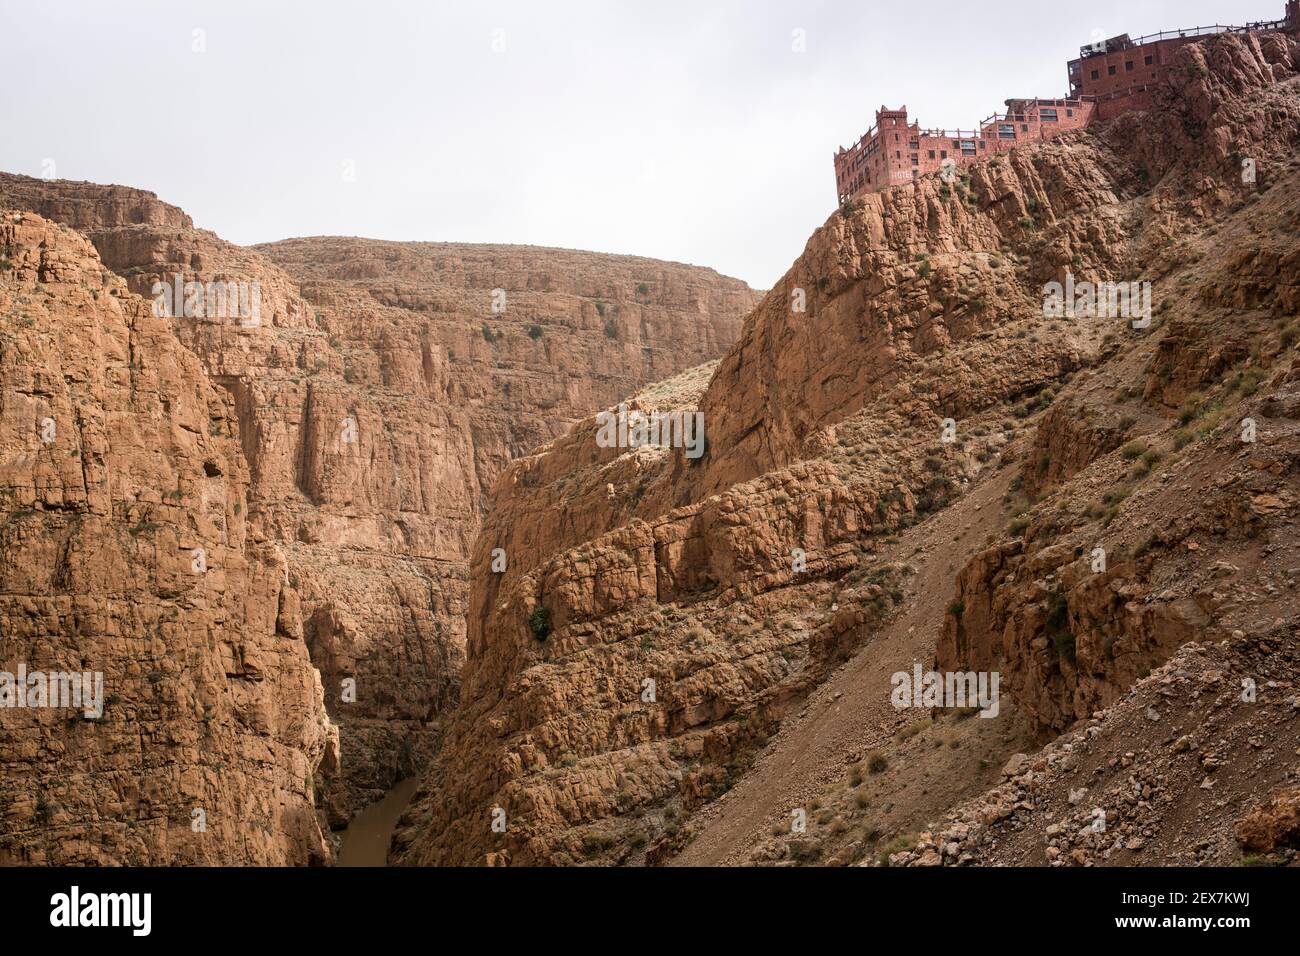 hotel perched on a cliff side overlooking a chasm or gorge in a barren landscape Stock Photo